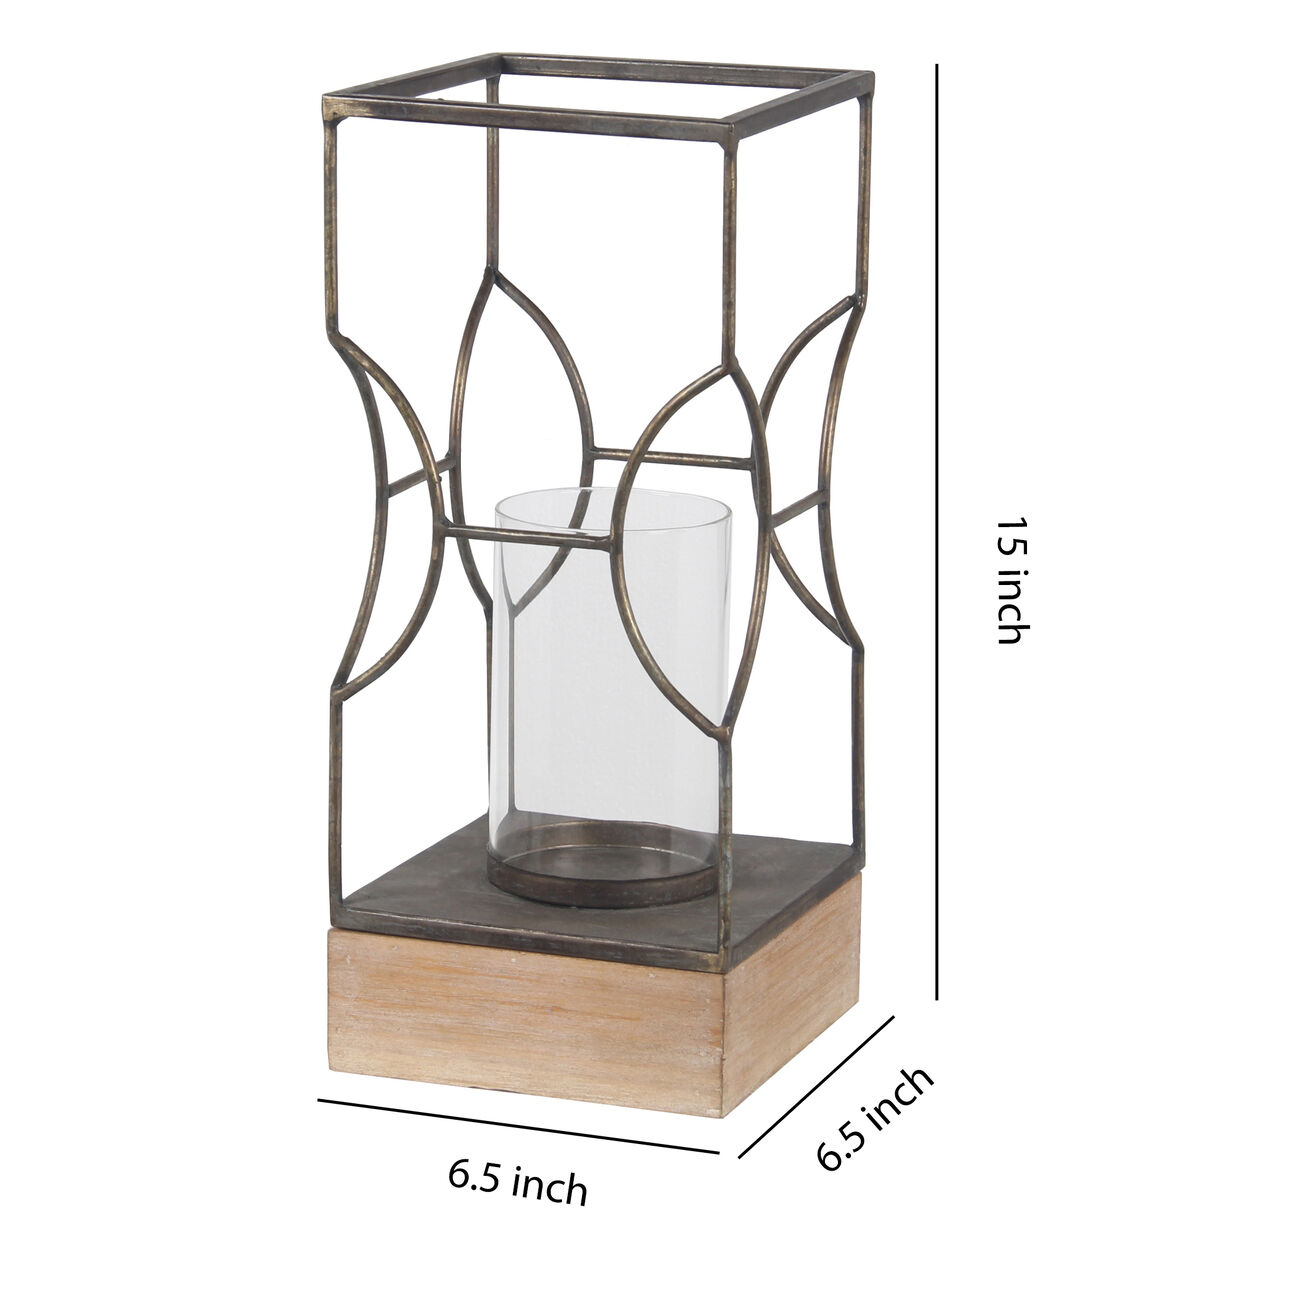 Wood and Metal Lantern with Geometric Details, Gray and Brown